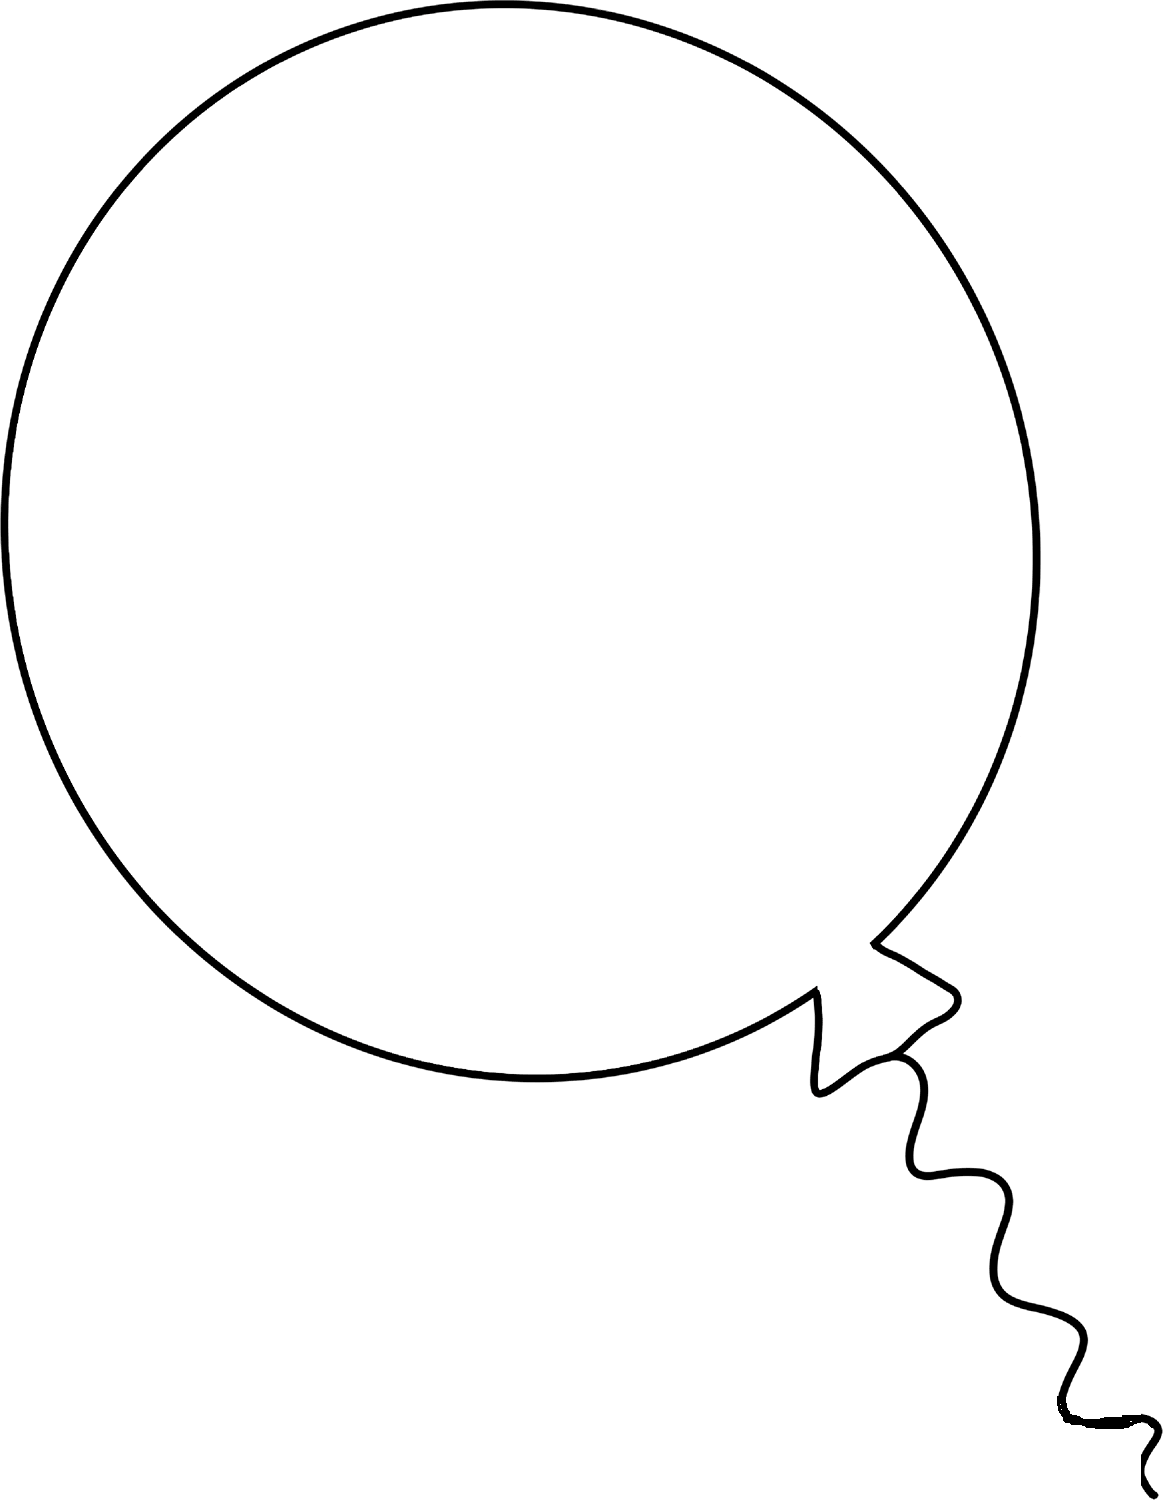 Balloon Outline Coloring Page